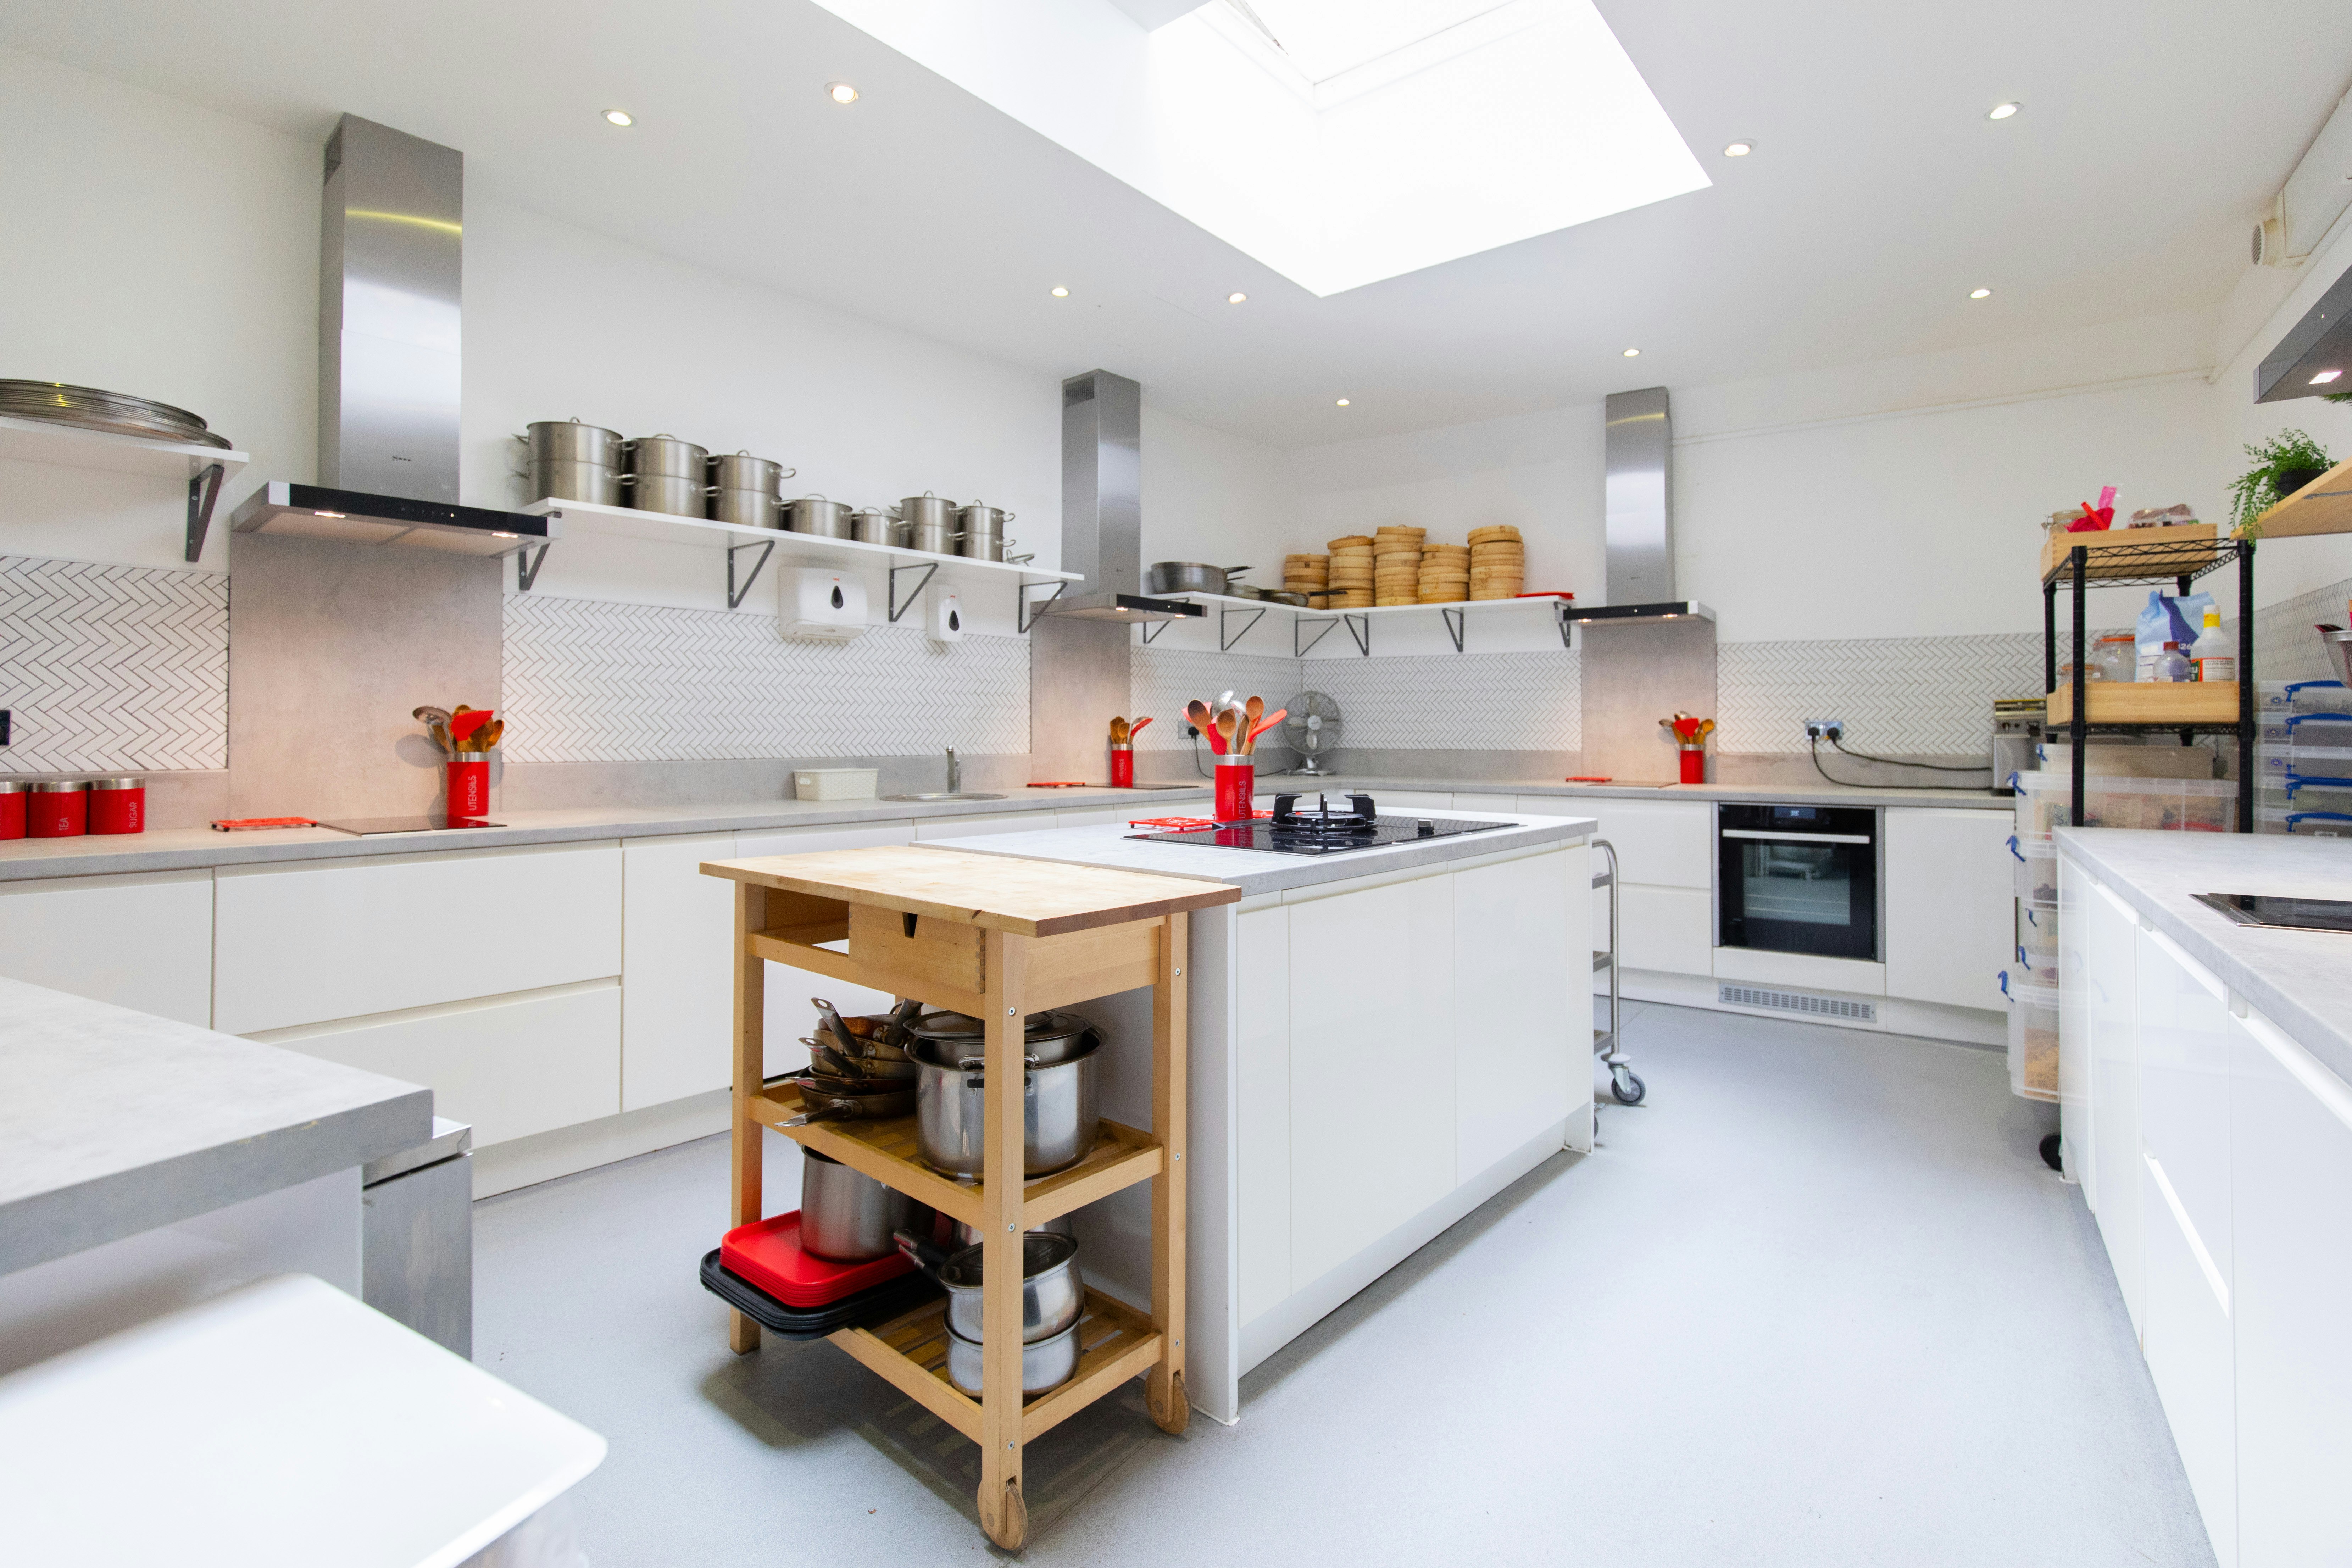 Kitchenes For Hire Venues in London - School of Wok